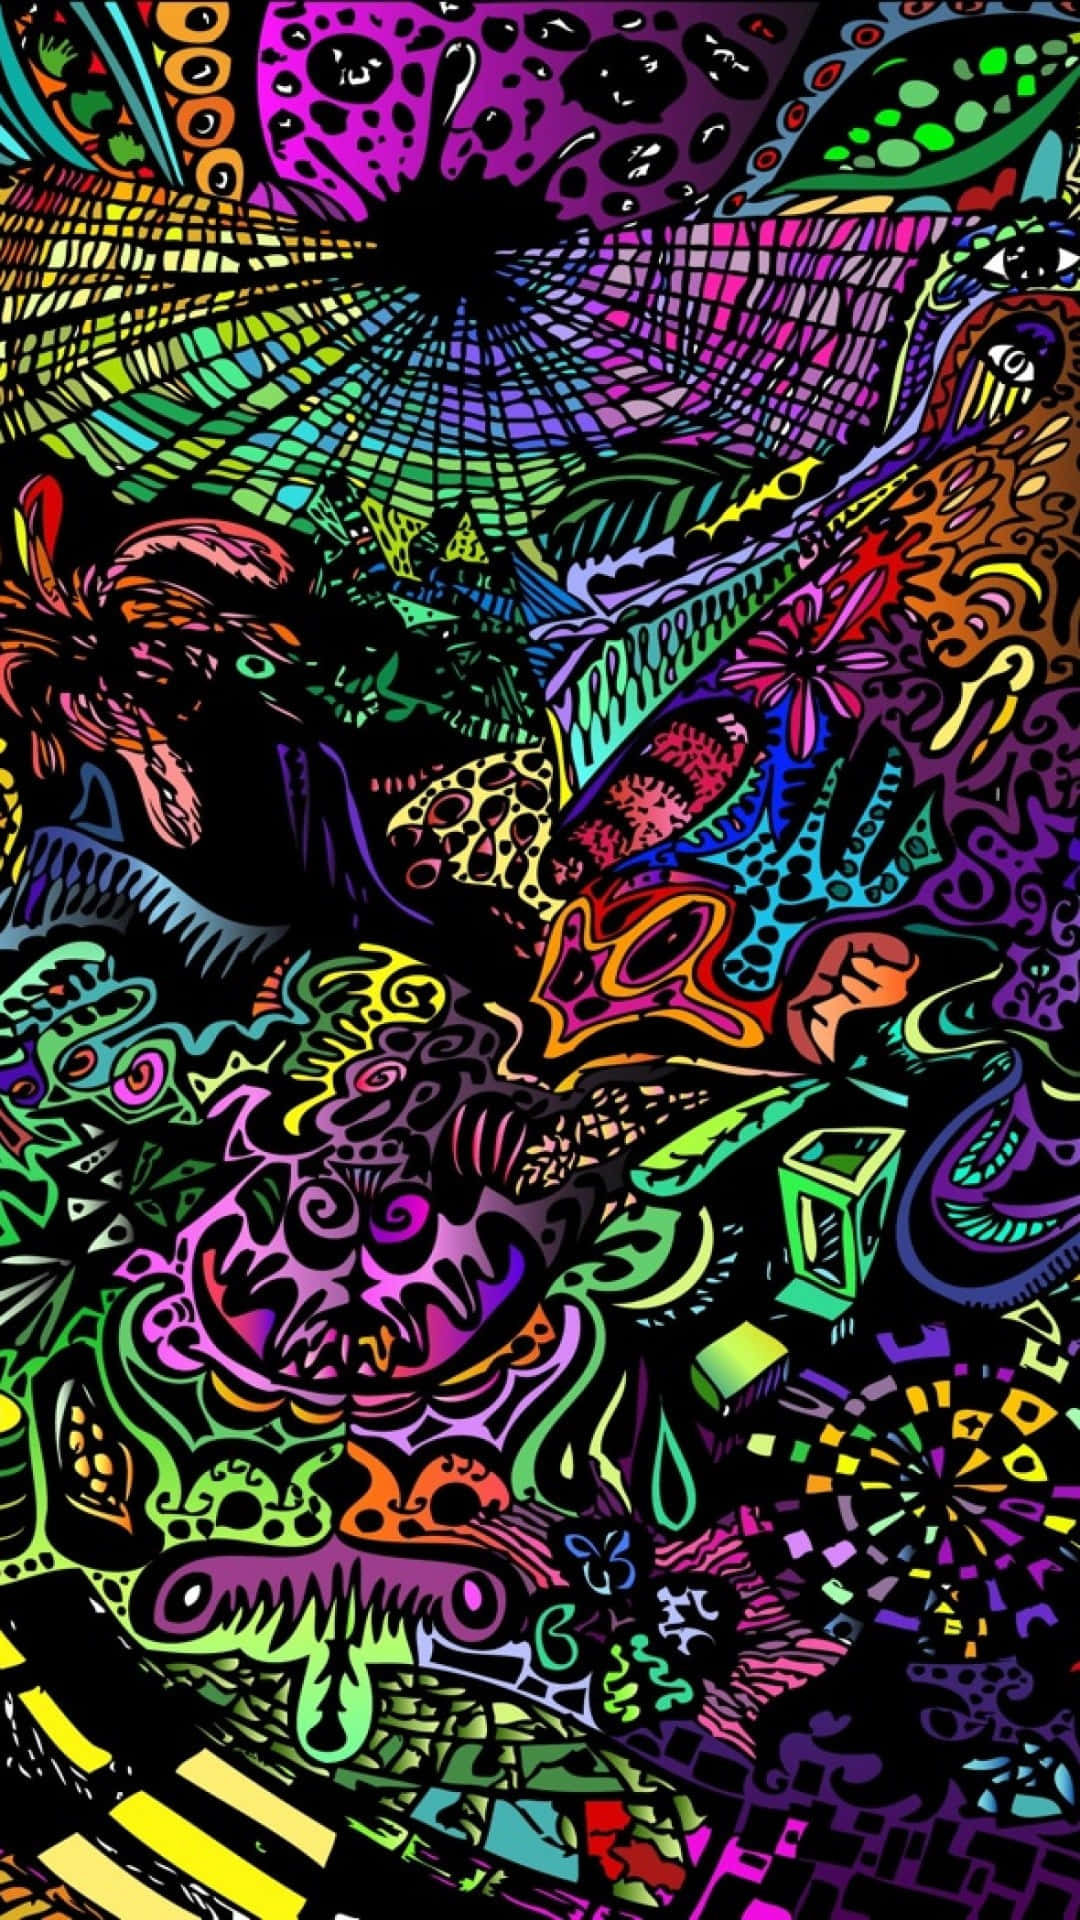 A vibrant, colorful and visually stunning trippy hippie artwork. Wallpaper